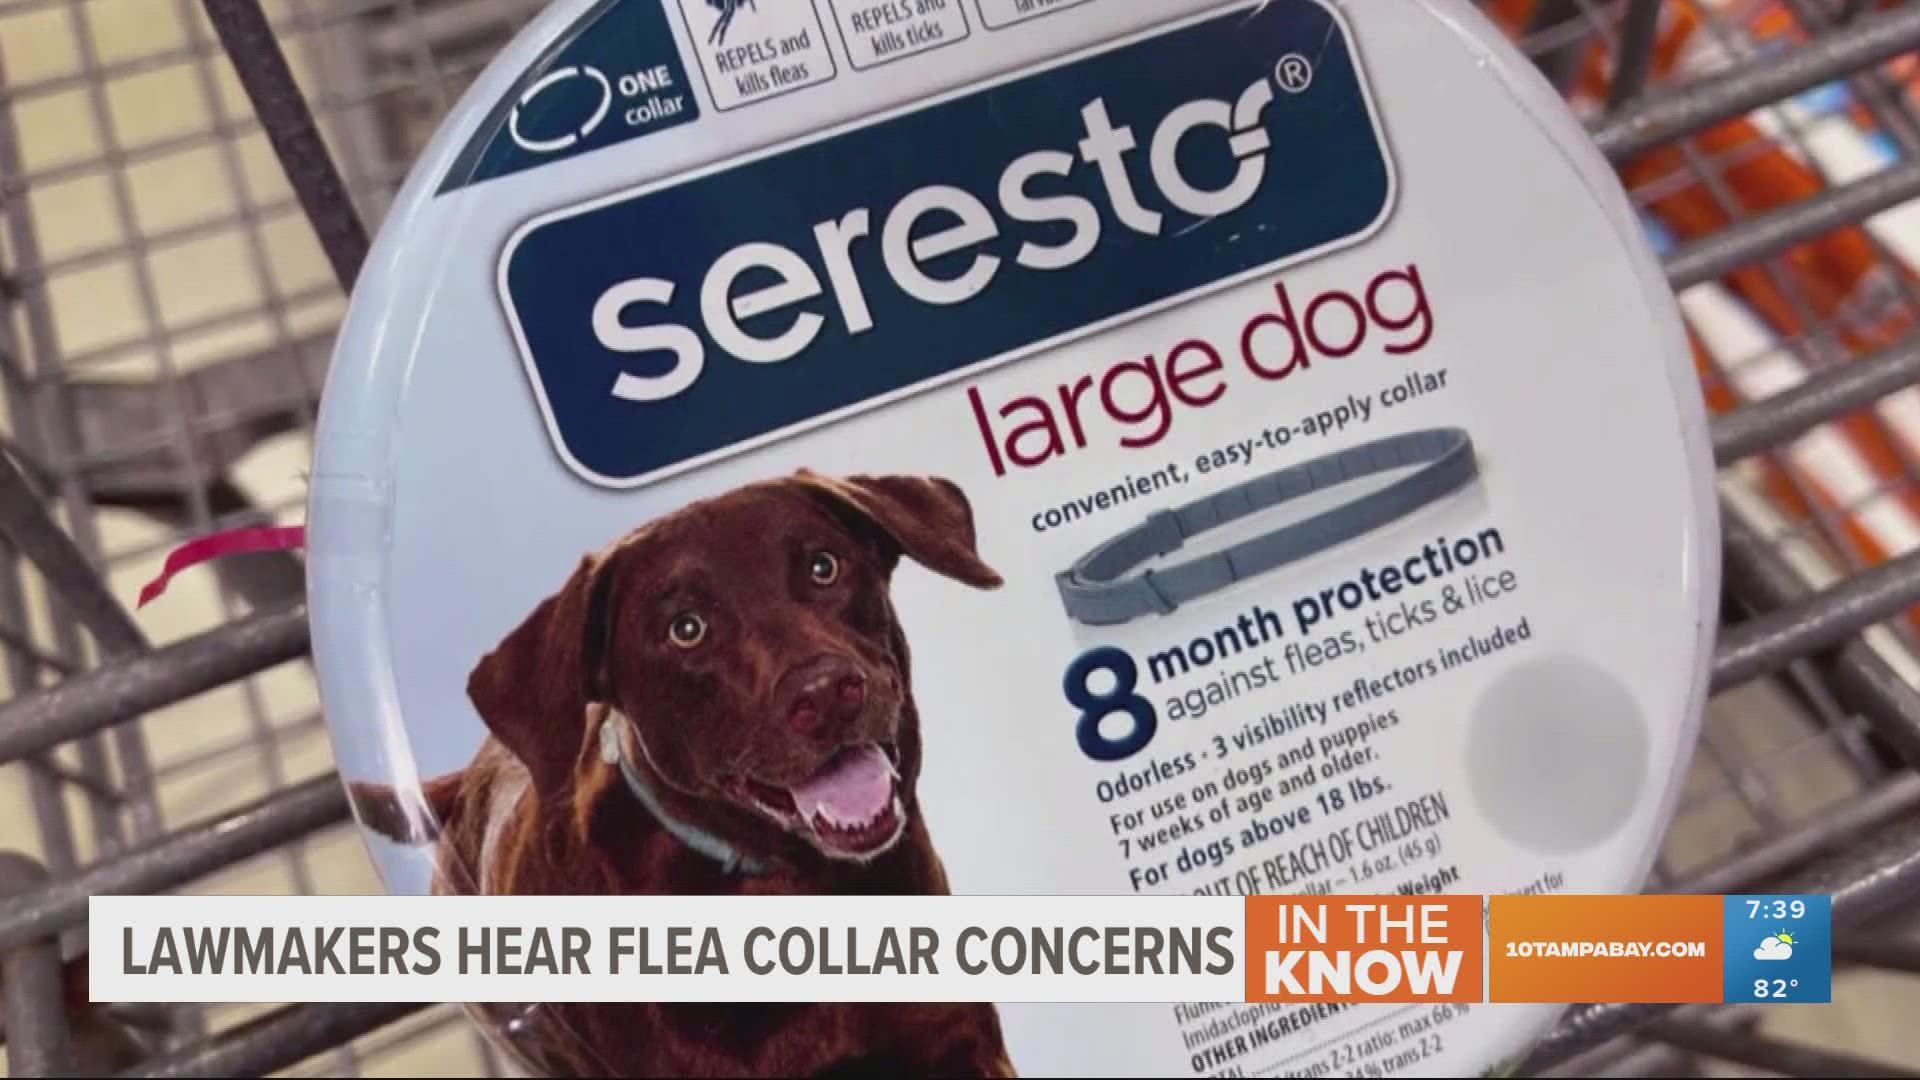 Lawmakers say the Seresto flea collar made by Elanco is linked to almost 100,000 incidents and 2,500 pet deaths reported to the EPA.